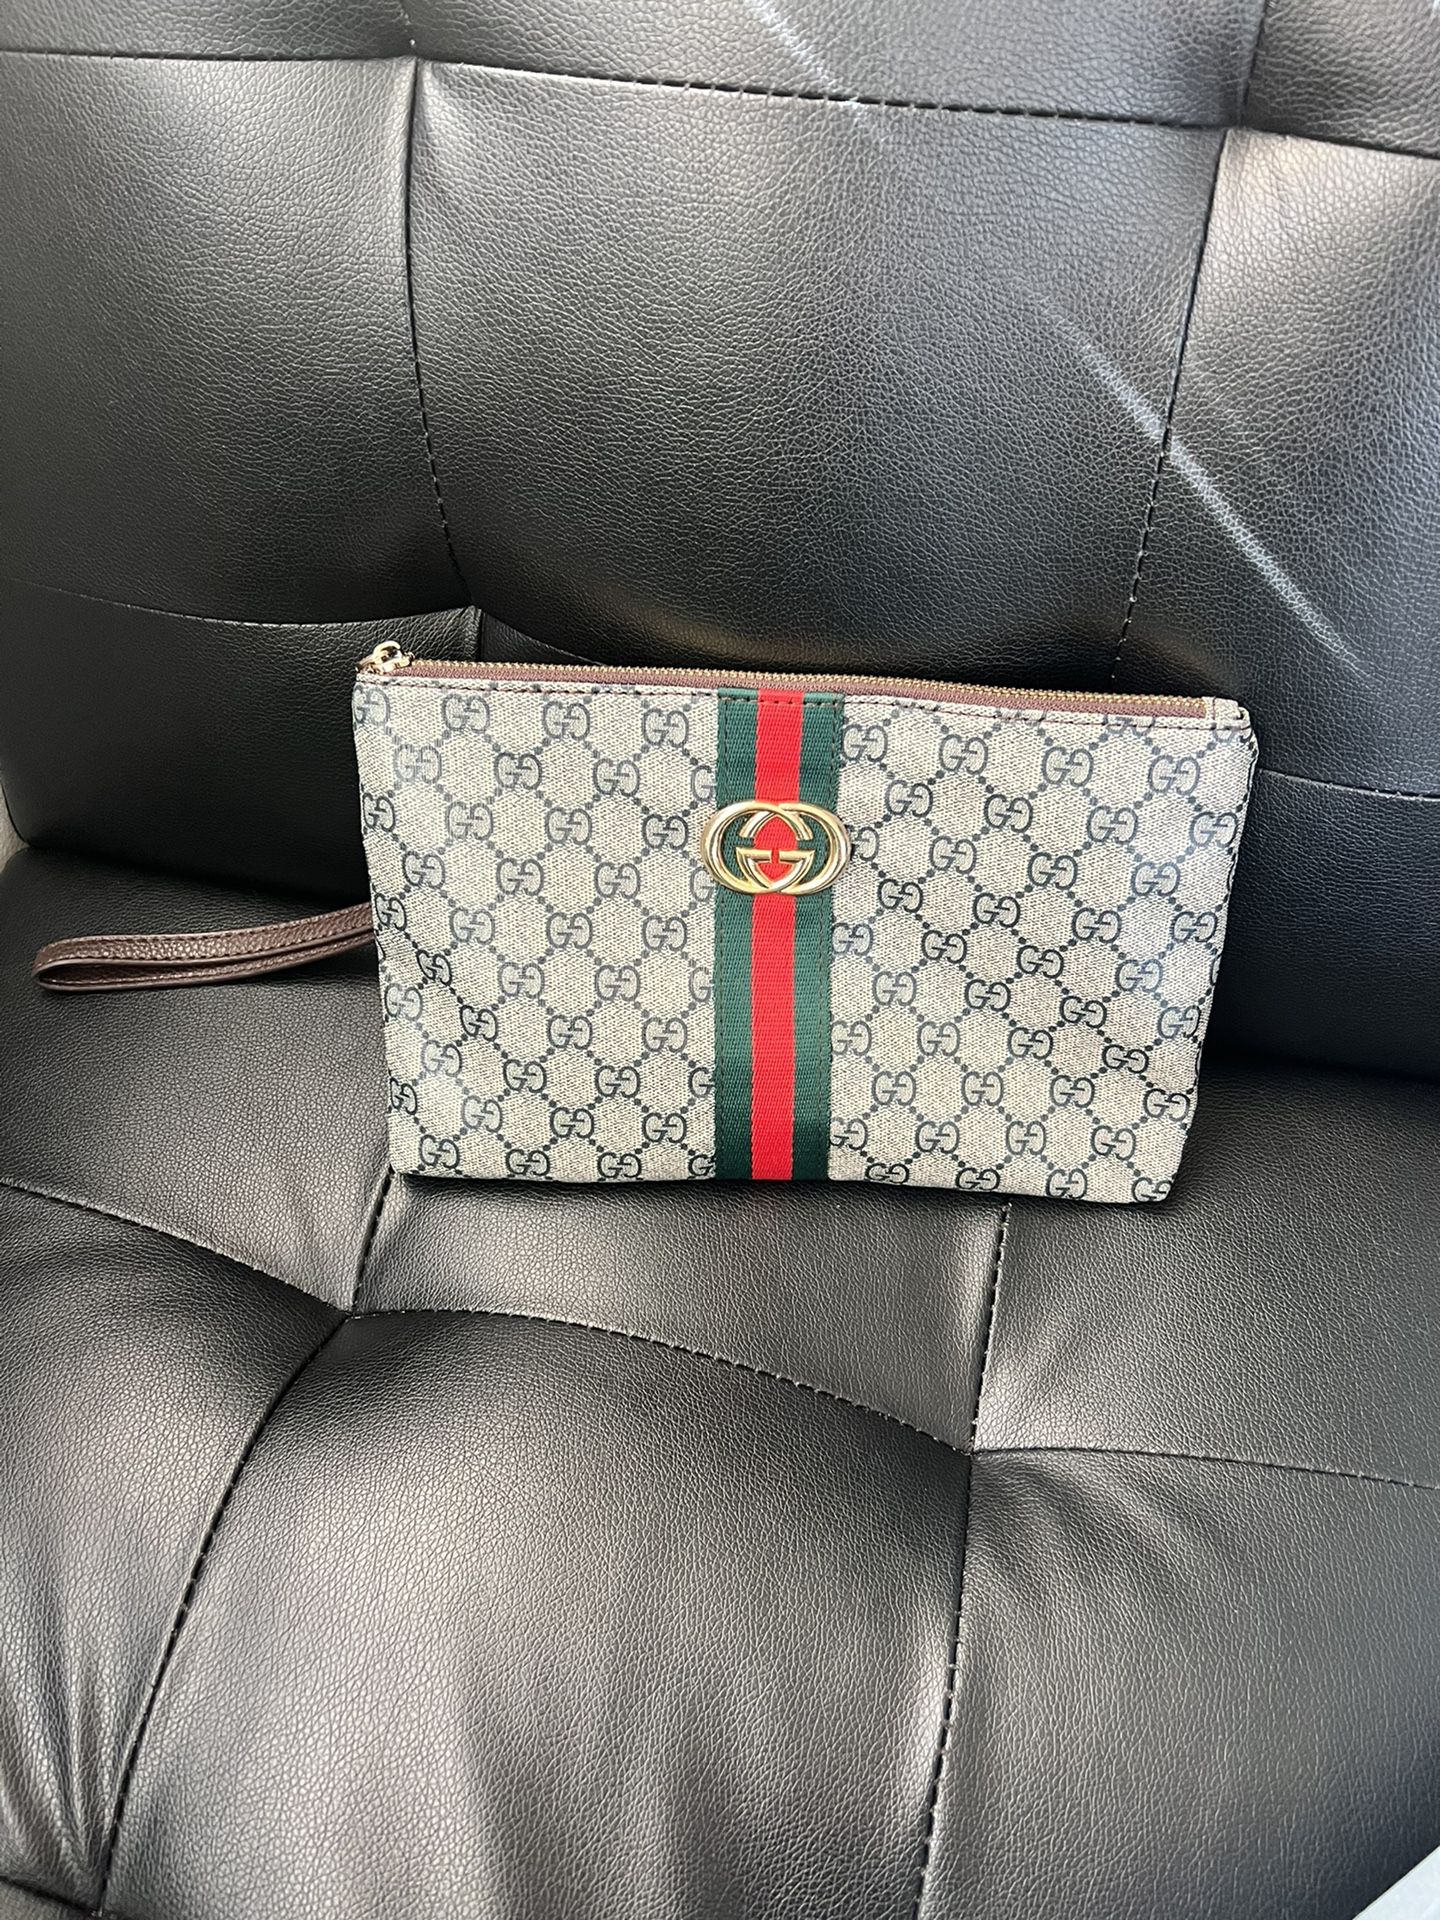 Clare Vivier Foldover Clutch - Never Used! for Sale in Burbank, CA - OfferUp